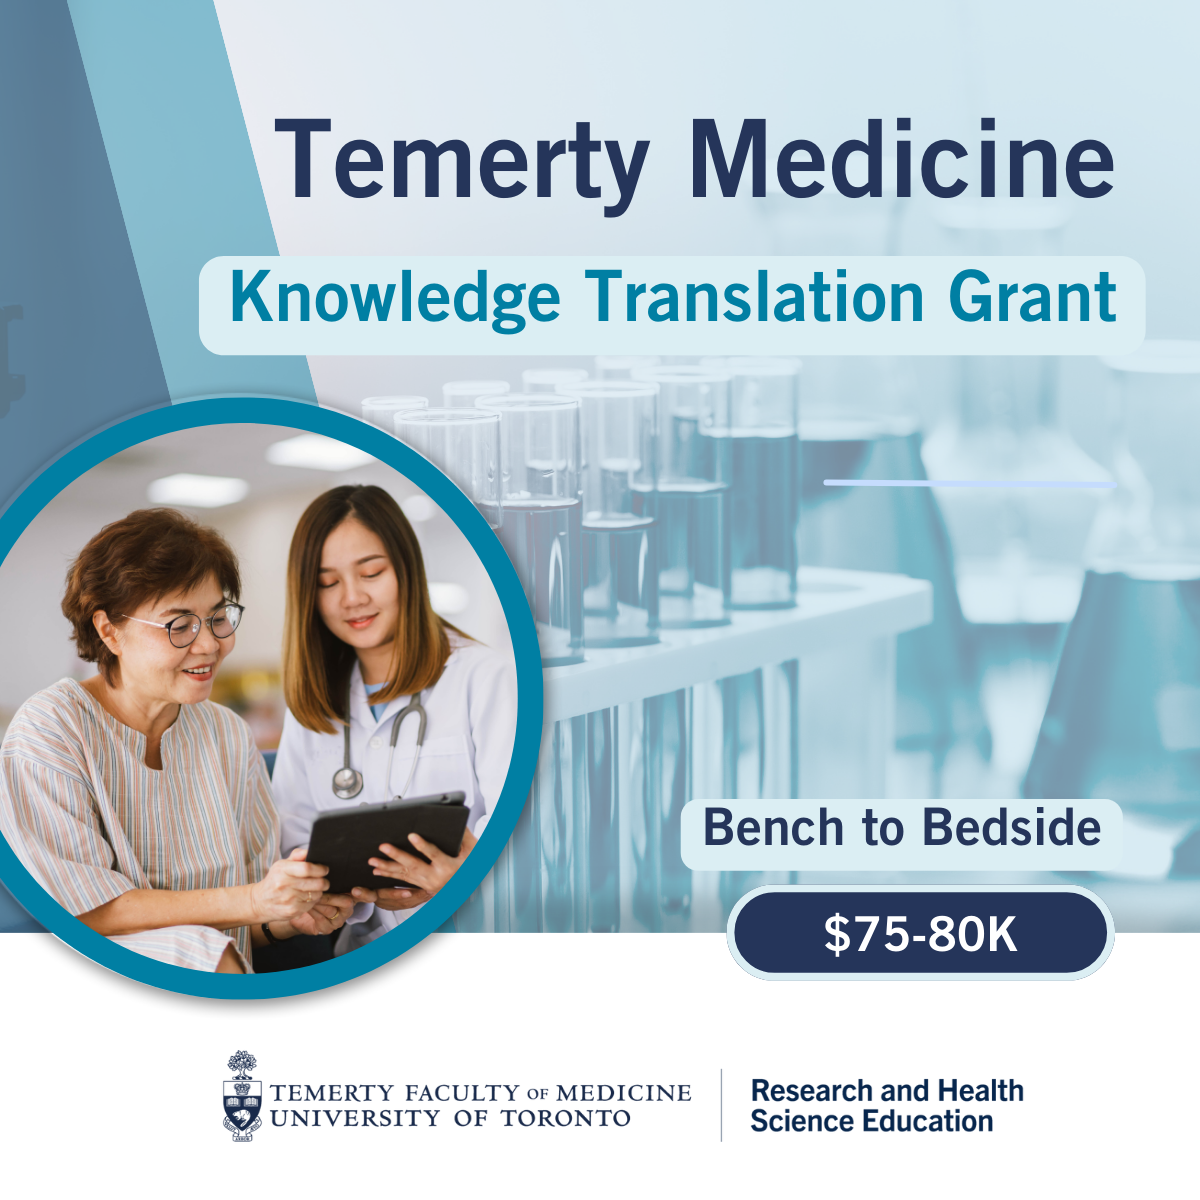 Temerty Medicine Knowledge Translation Grant Bench to Bedside $75-80K; a patient and a health care professional review something on a tablet; test tubes and beakers in the background